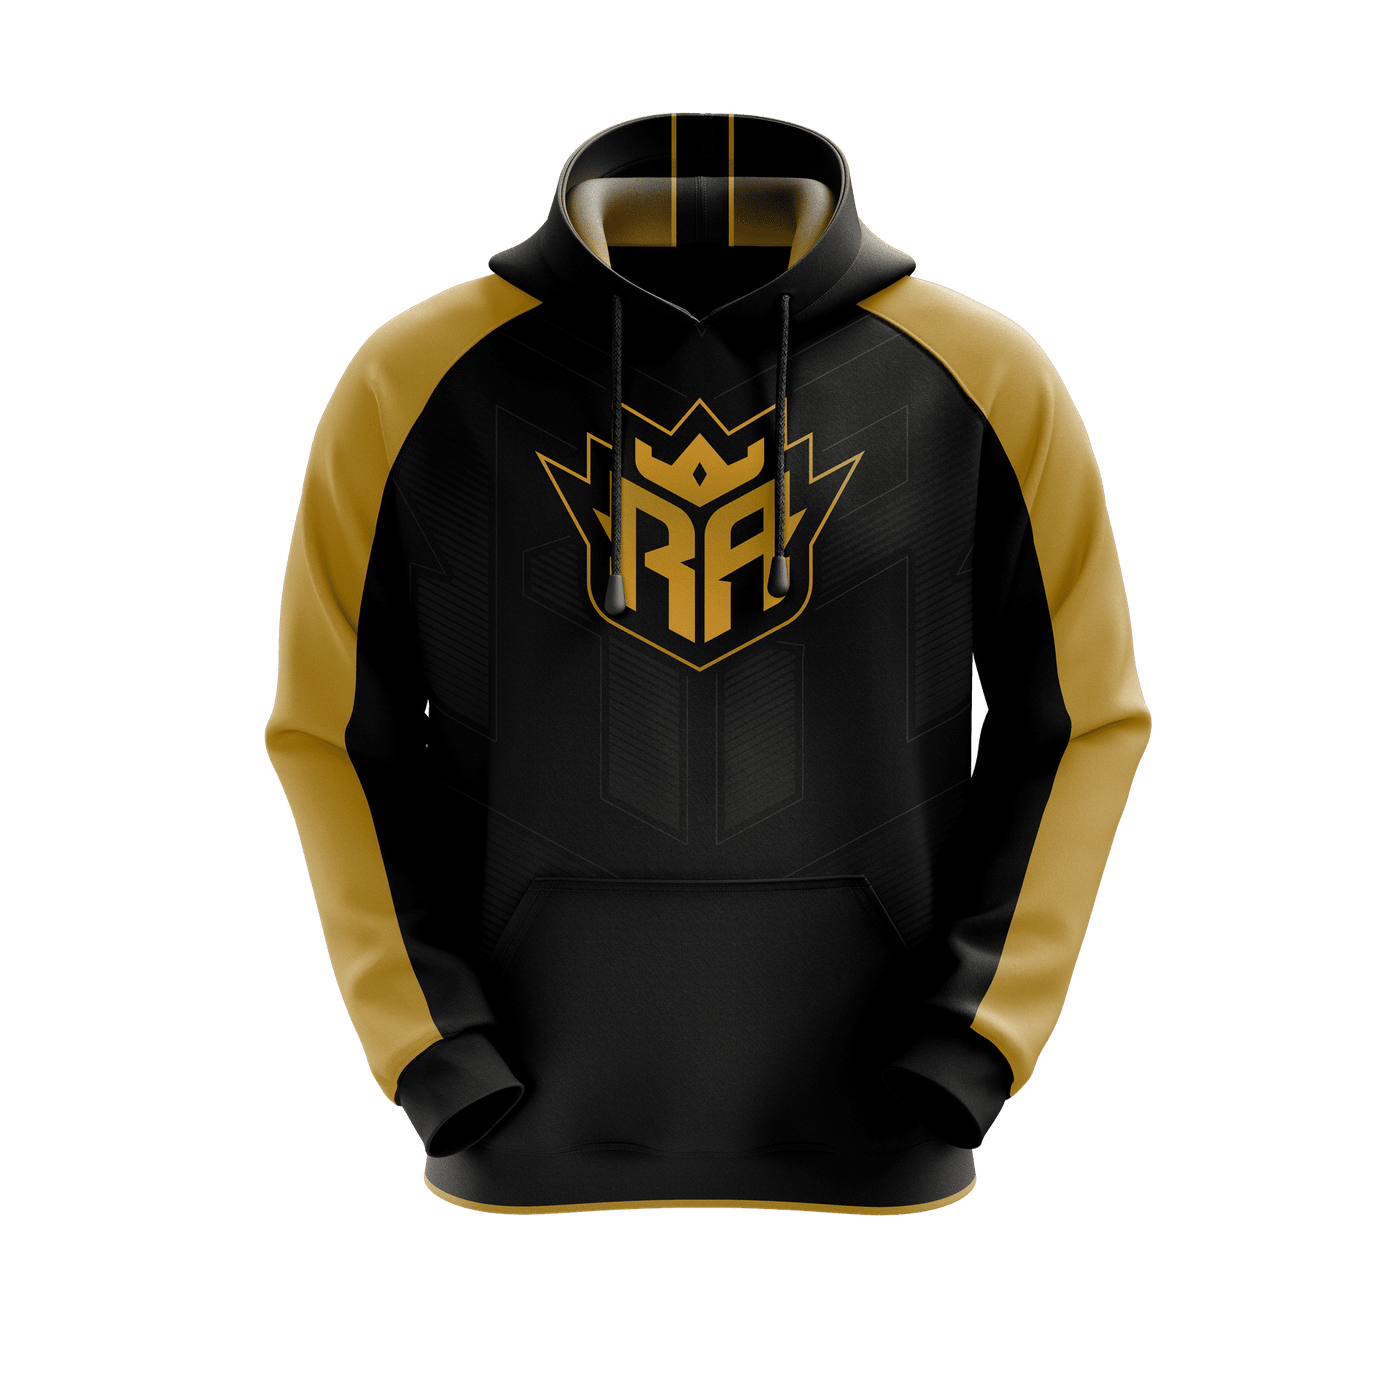 Reign Above Pro Hoodie